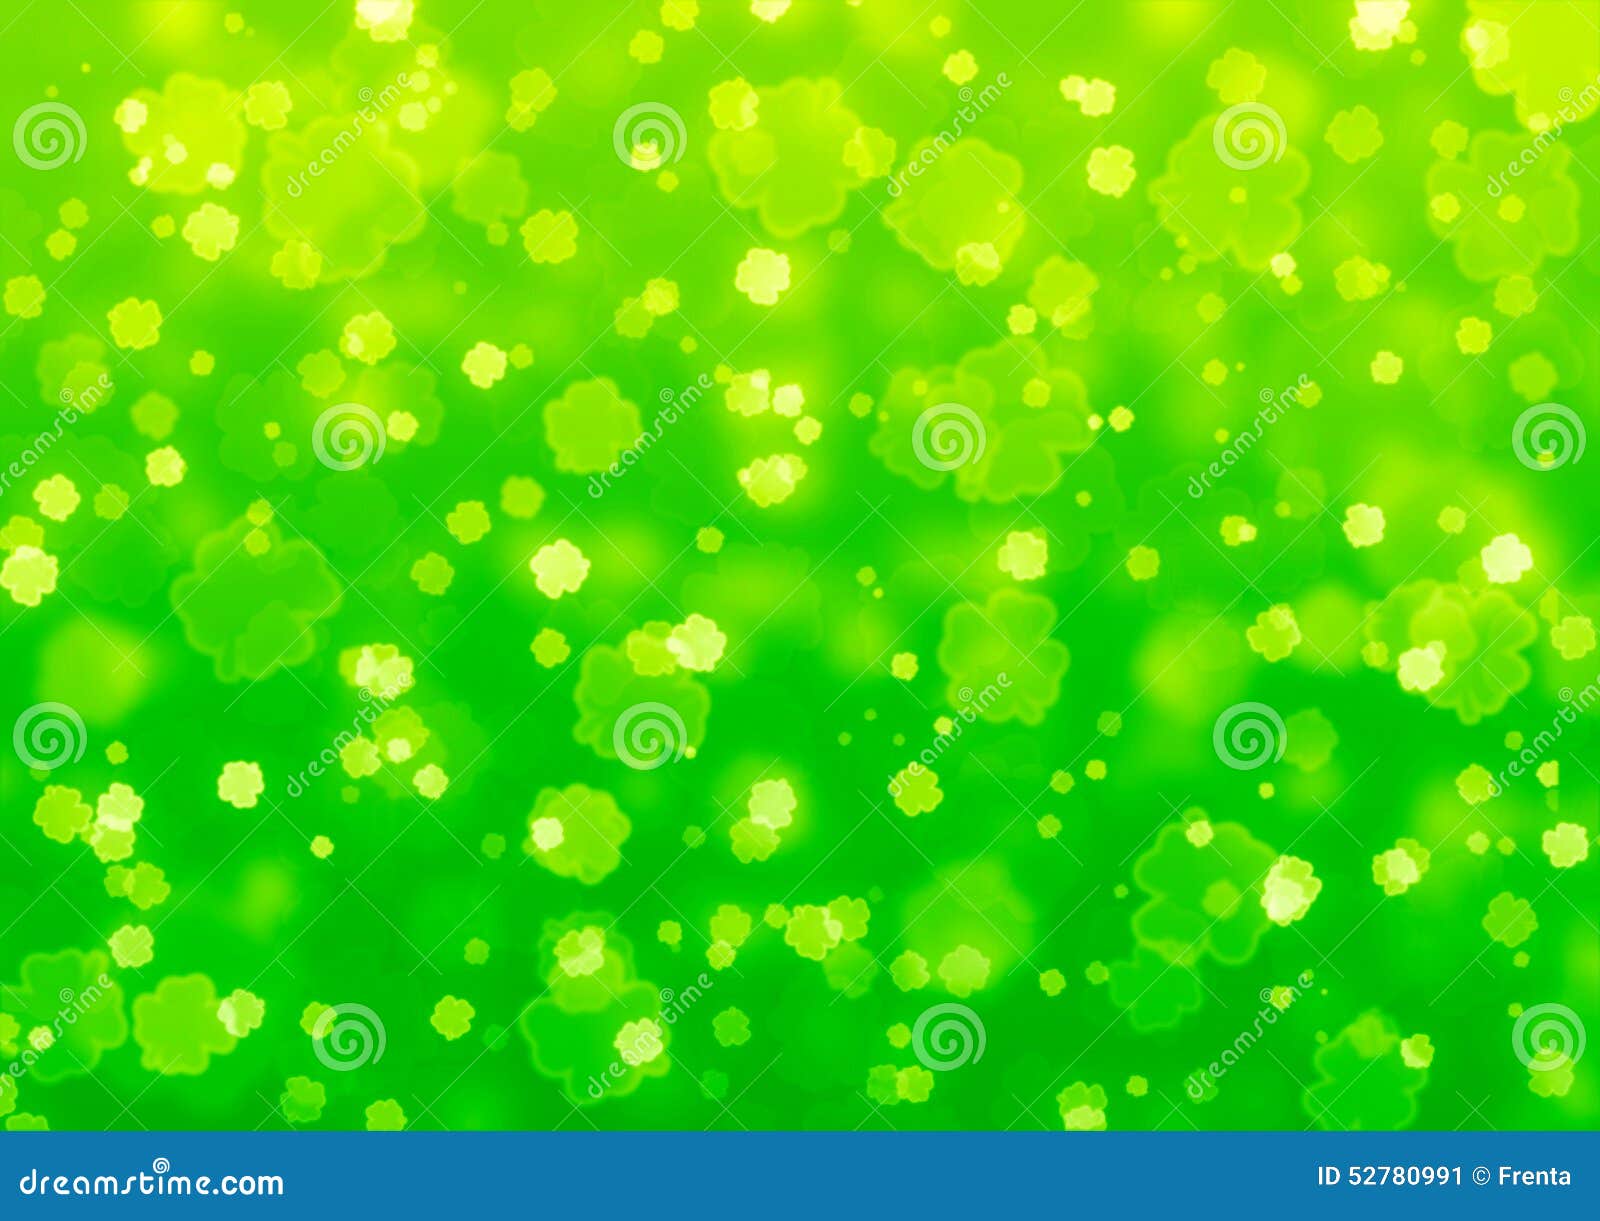 Background of green color with shamrock leaves